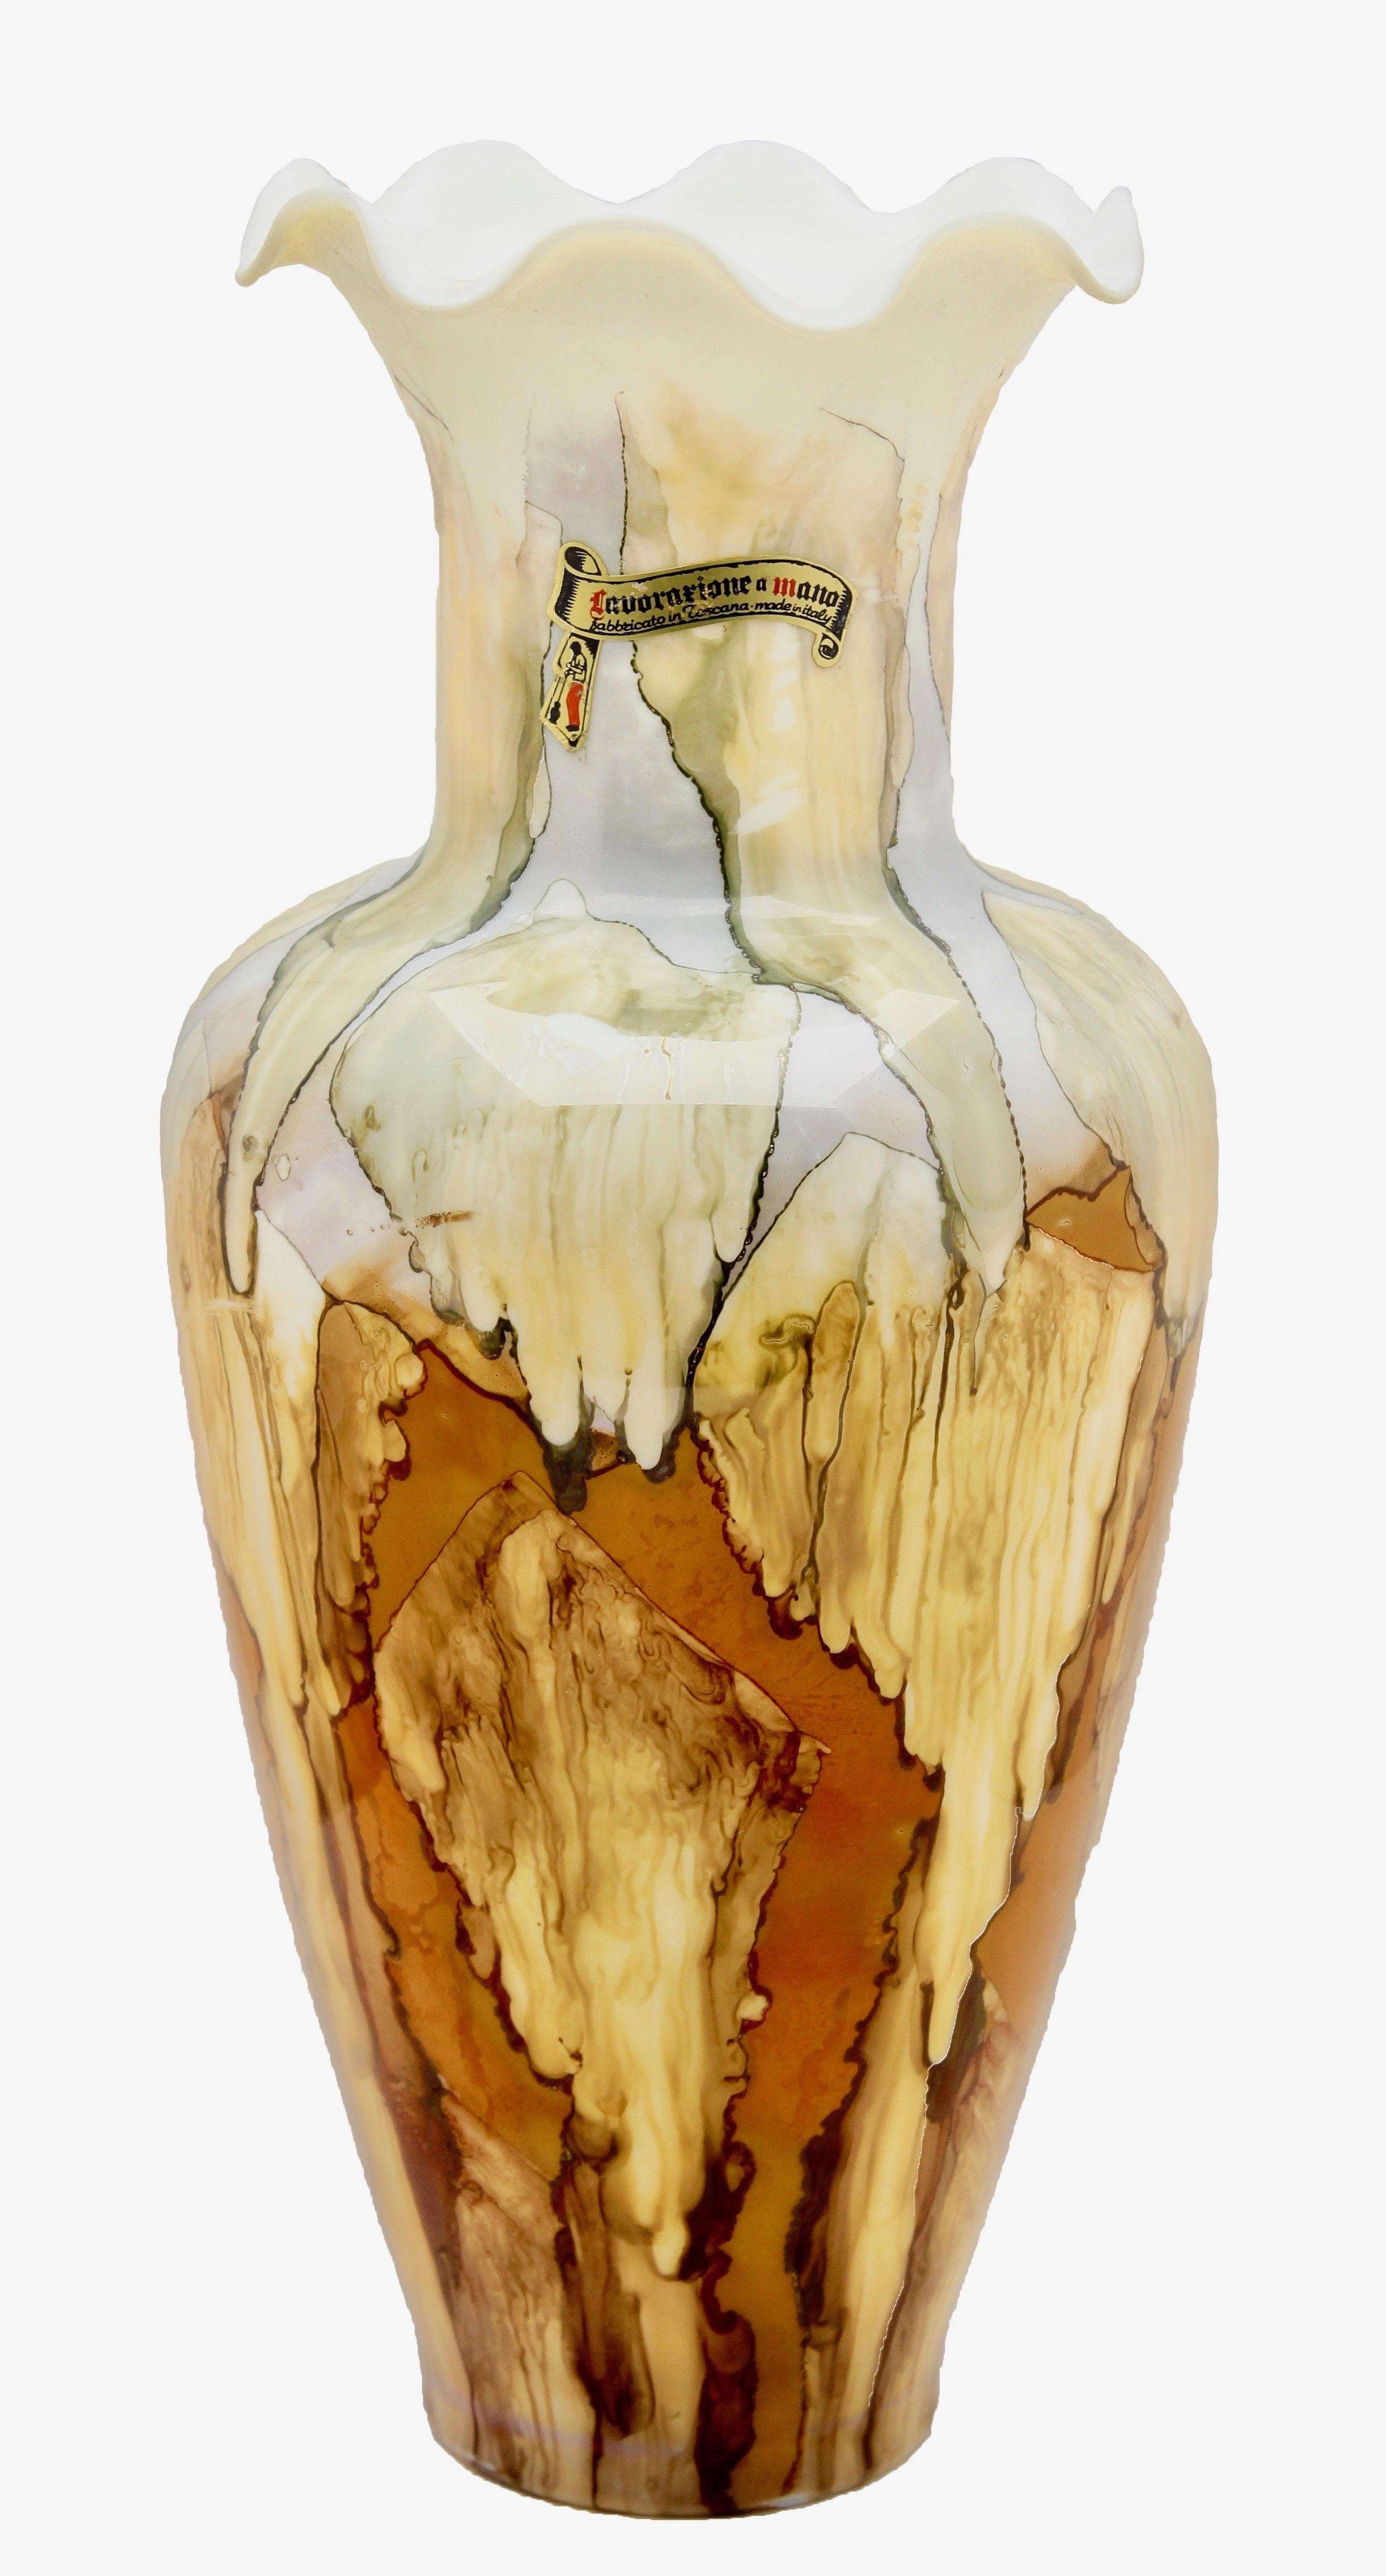 Vintage florentine opaline vase, 1955 with factory label. Created with neutral earthy colors to give an entrancing 3D effect like the walls of a cave.
This is an unusual decorative pattern and color in a large size, a subtle and engaging piece that